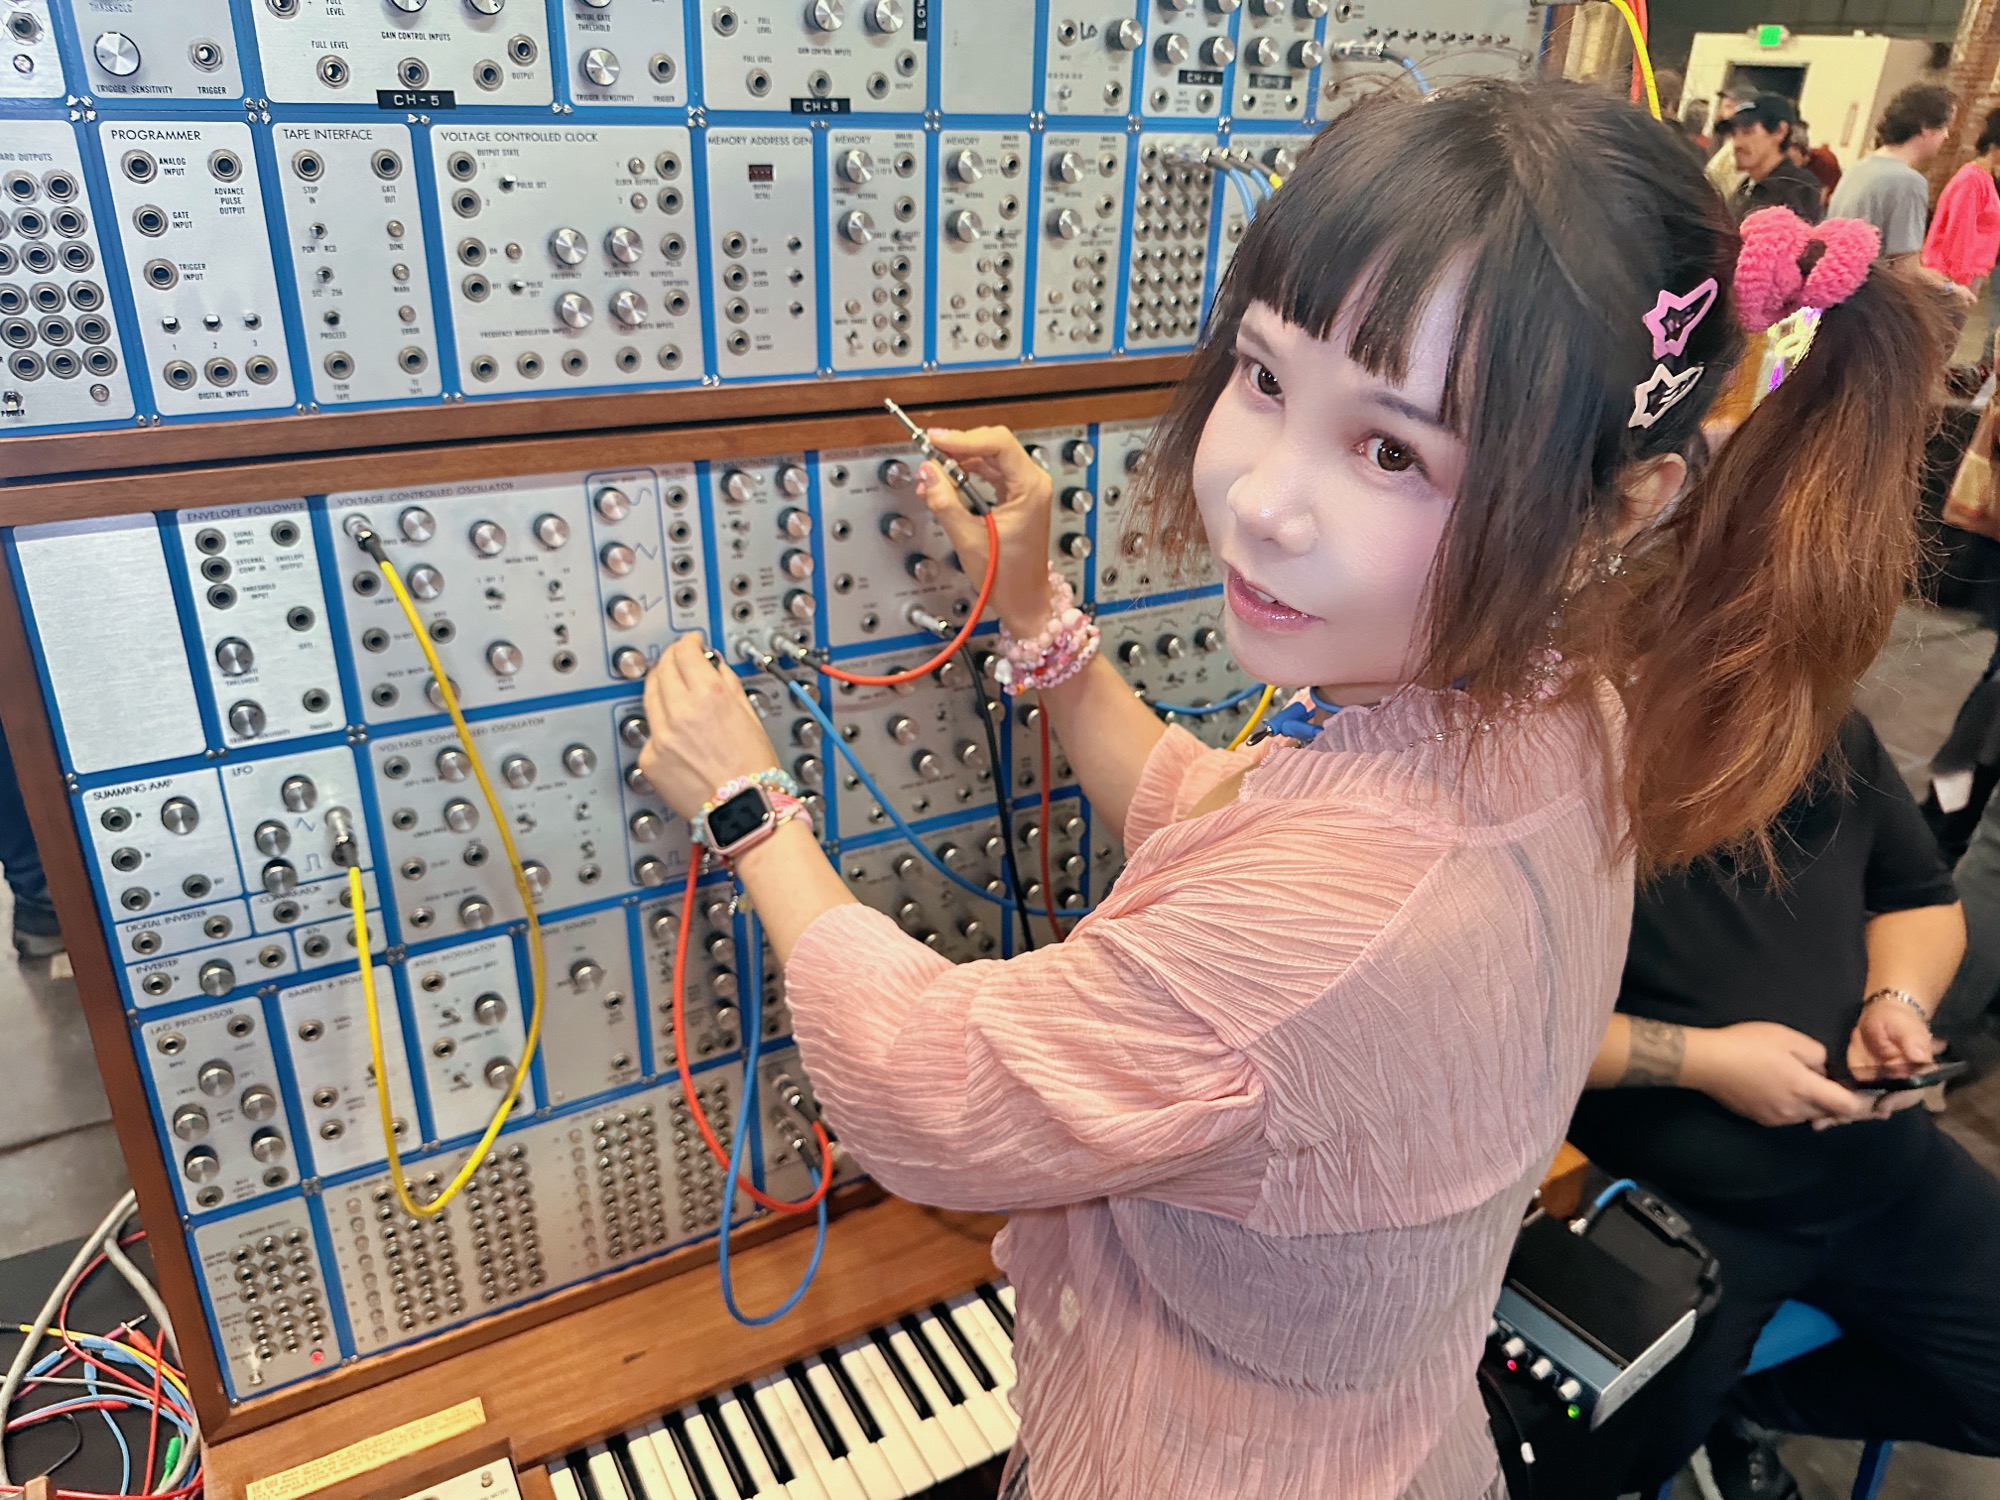 📰 Buchla & Friends: A Synth Maker Showcase @ Arts District Community Center, Los Angeles, US